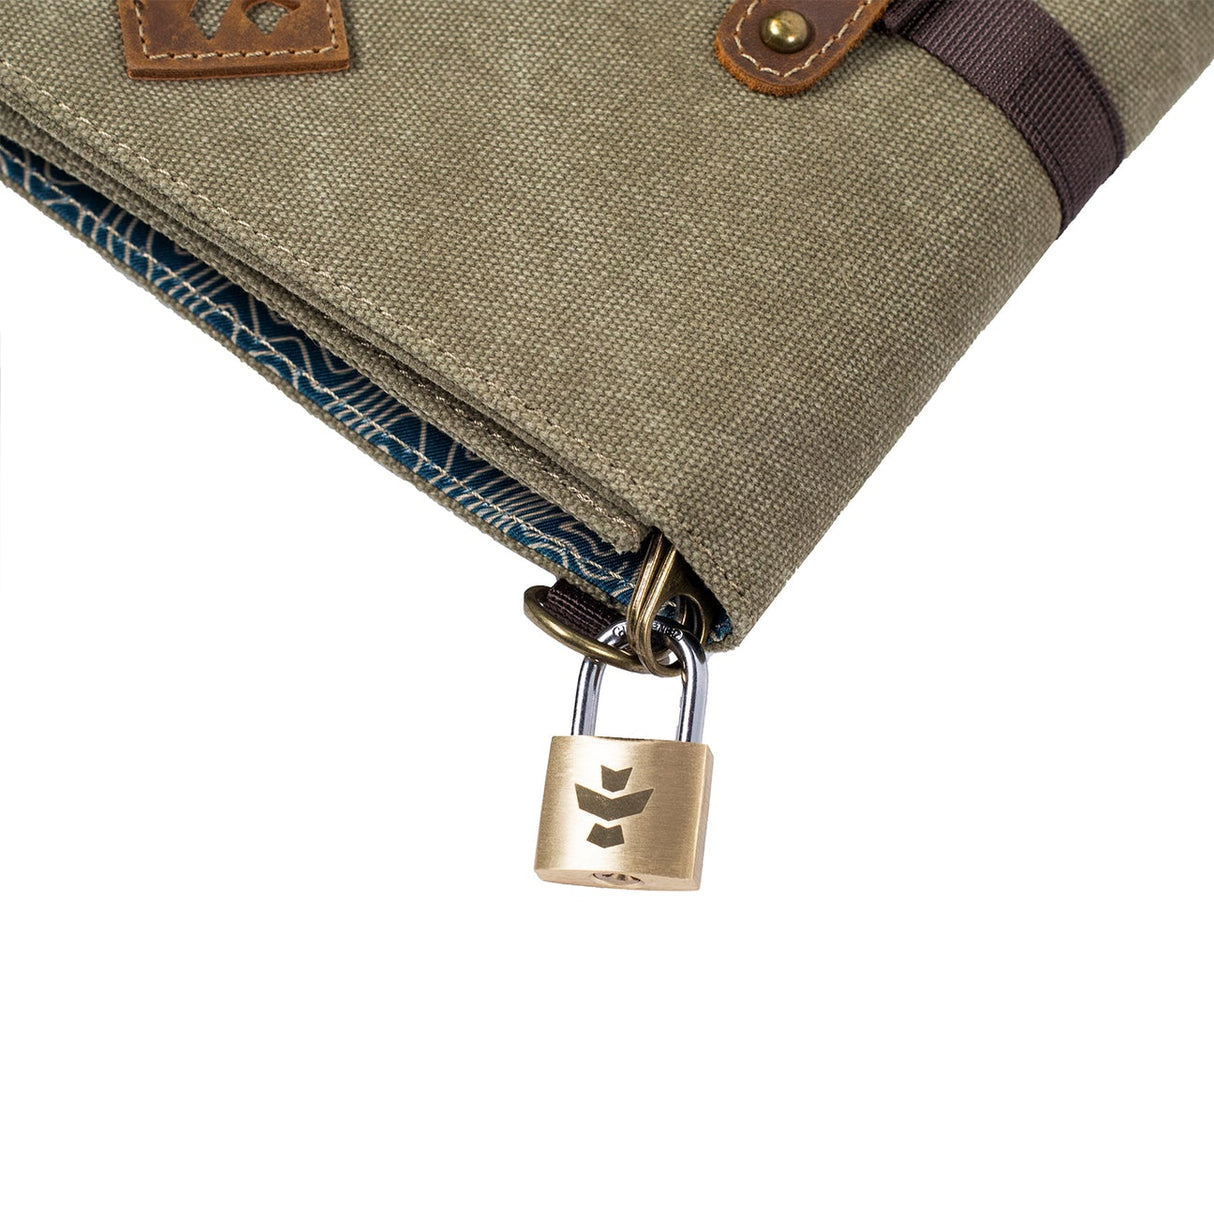 Revelry Supply Rolling Kit - Close-up of Smell Proof Lock on Canvas Bag